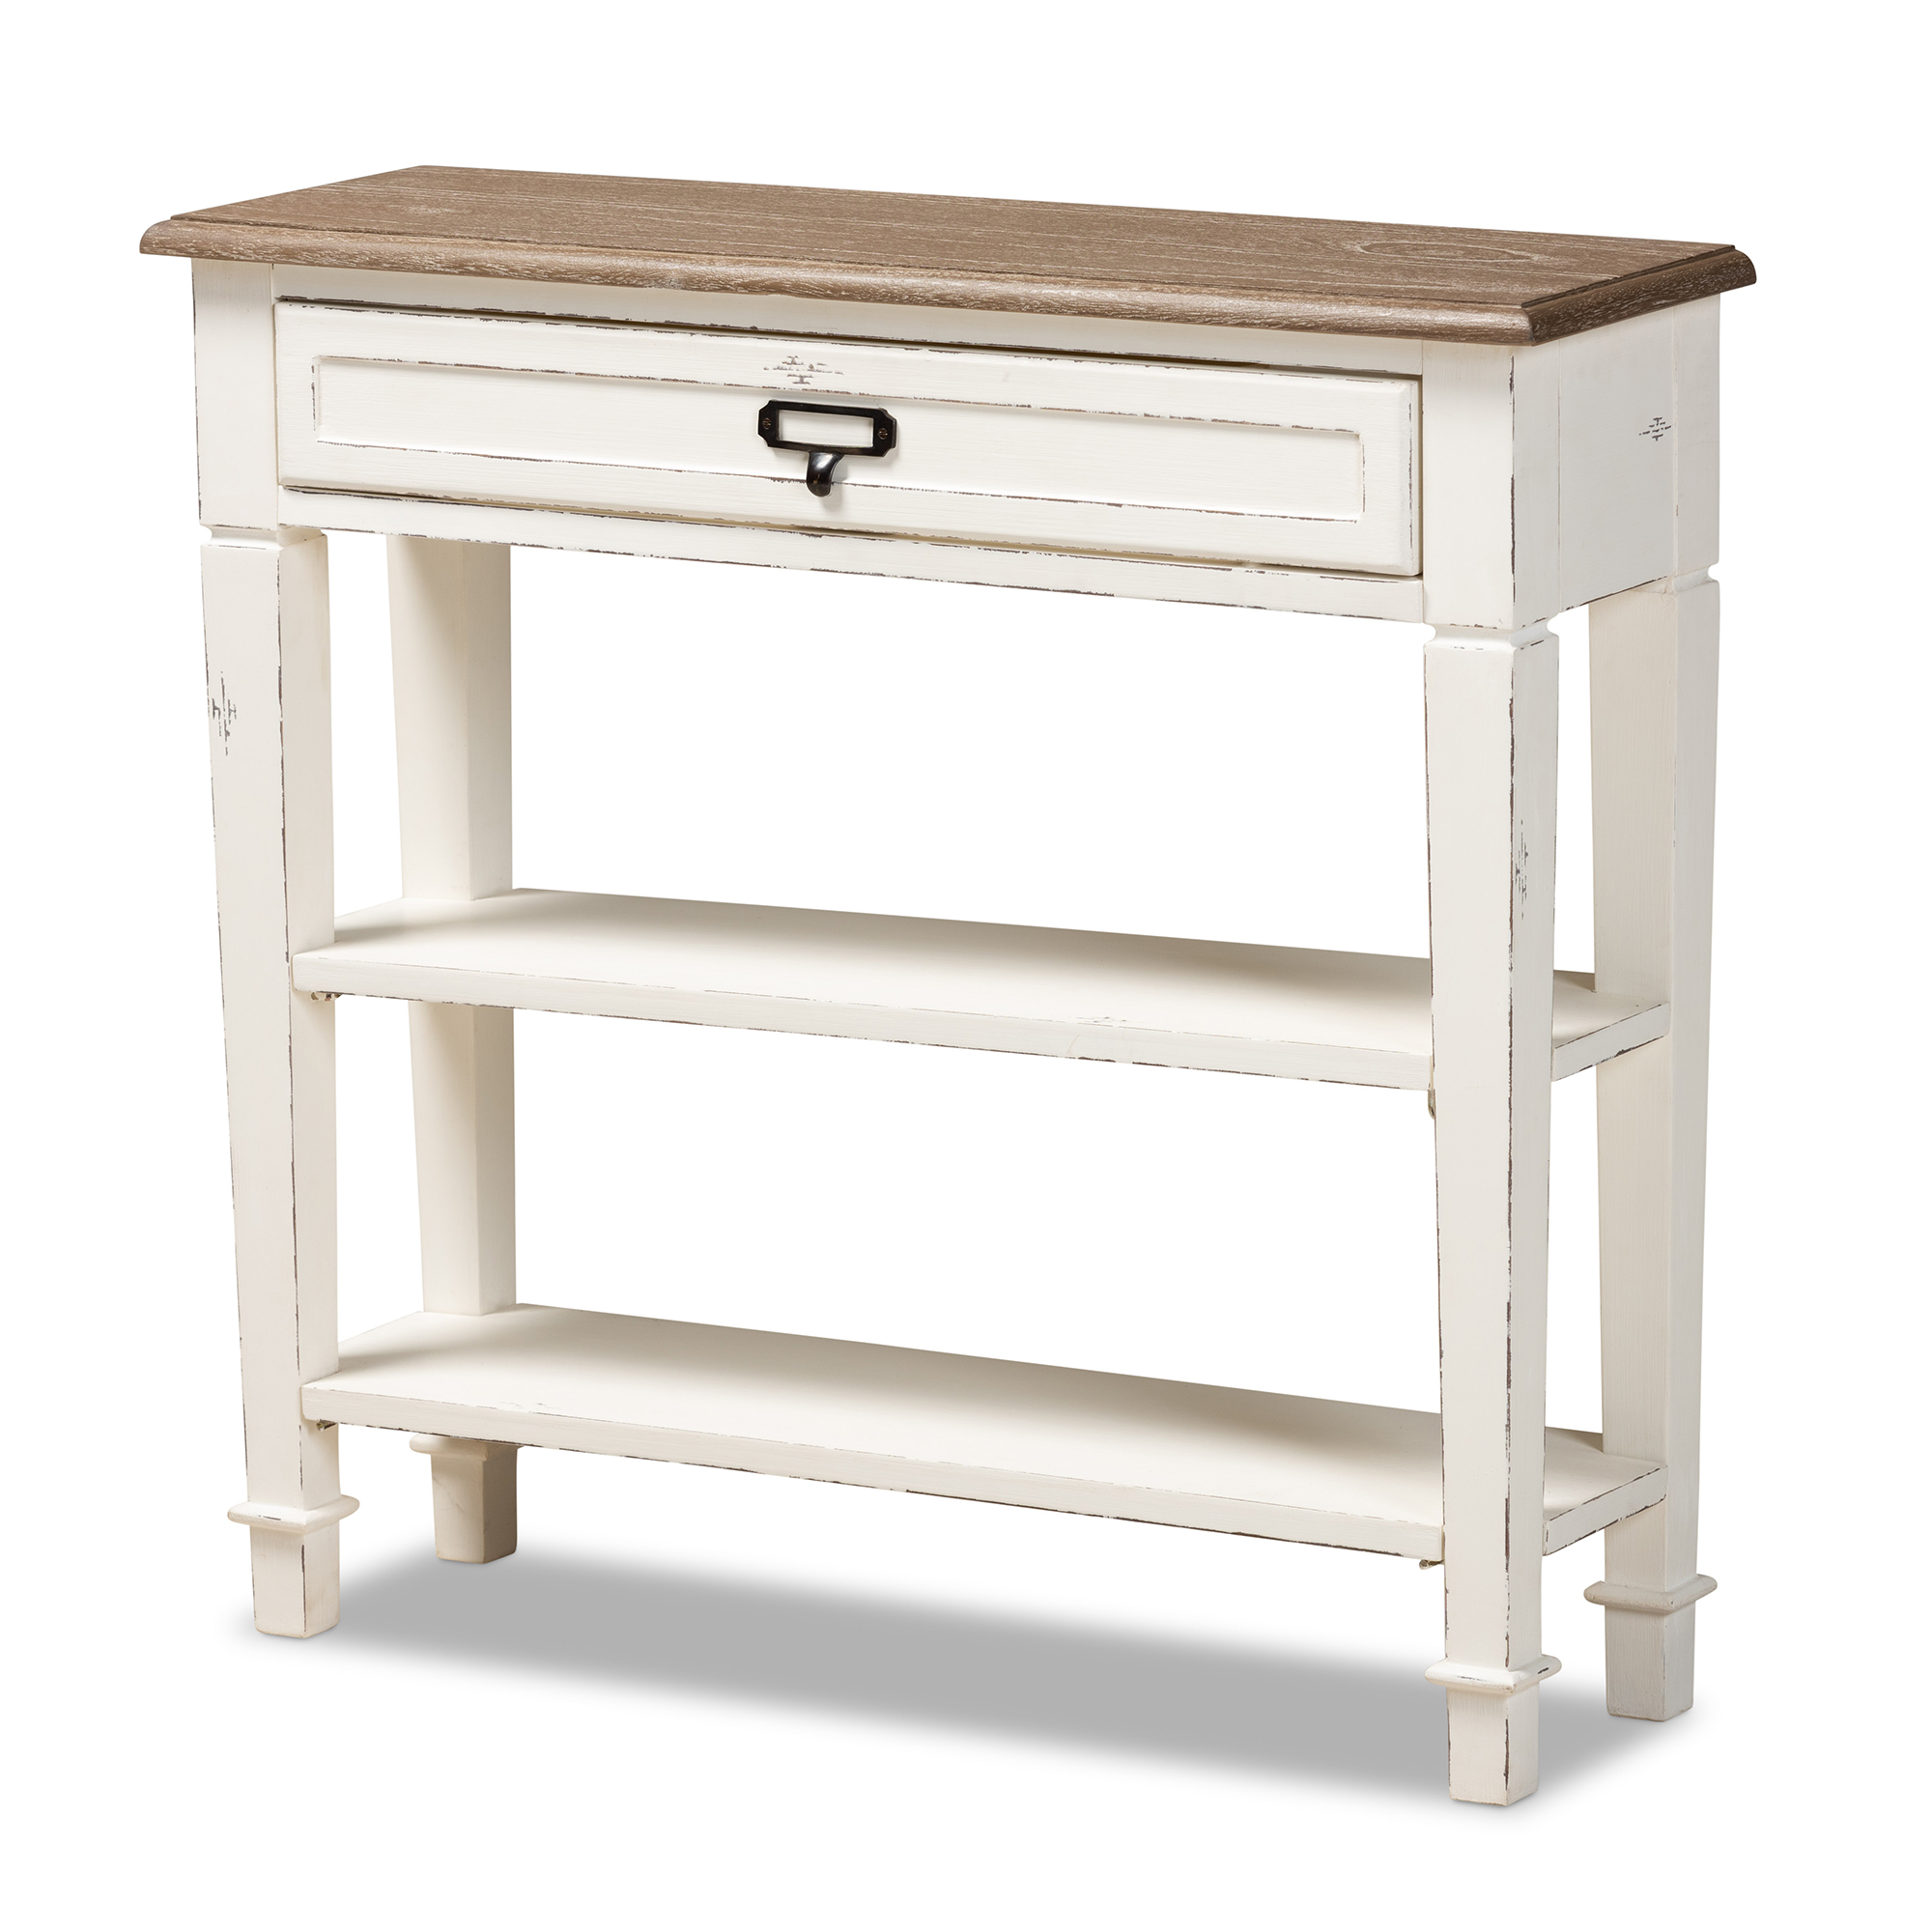 Baxton Studio Dauphine Traditional French Accent Console Table-1 Drawer Affordable modern furniture in Chicago,Dauphine Traditional French Accent Console Table-1 Drawer, Living Room Furniture Chicago